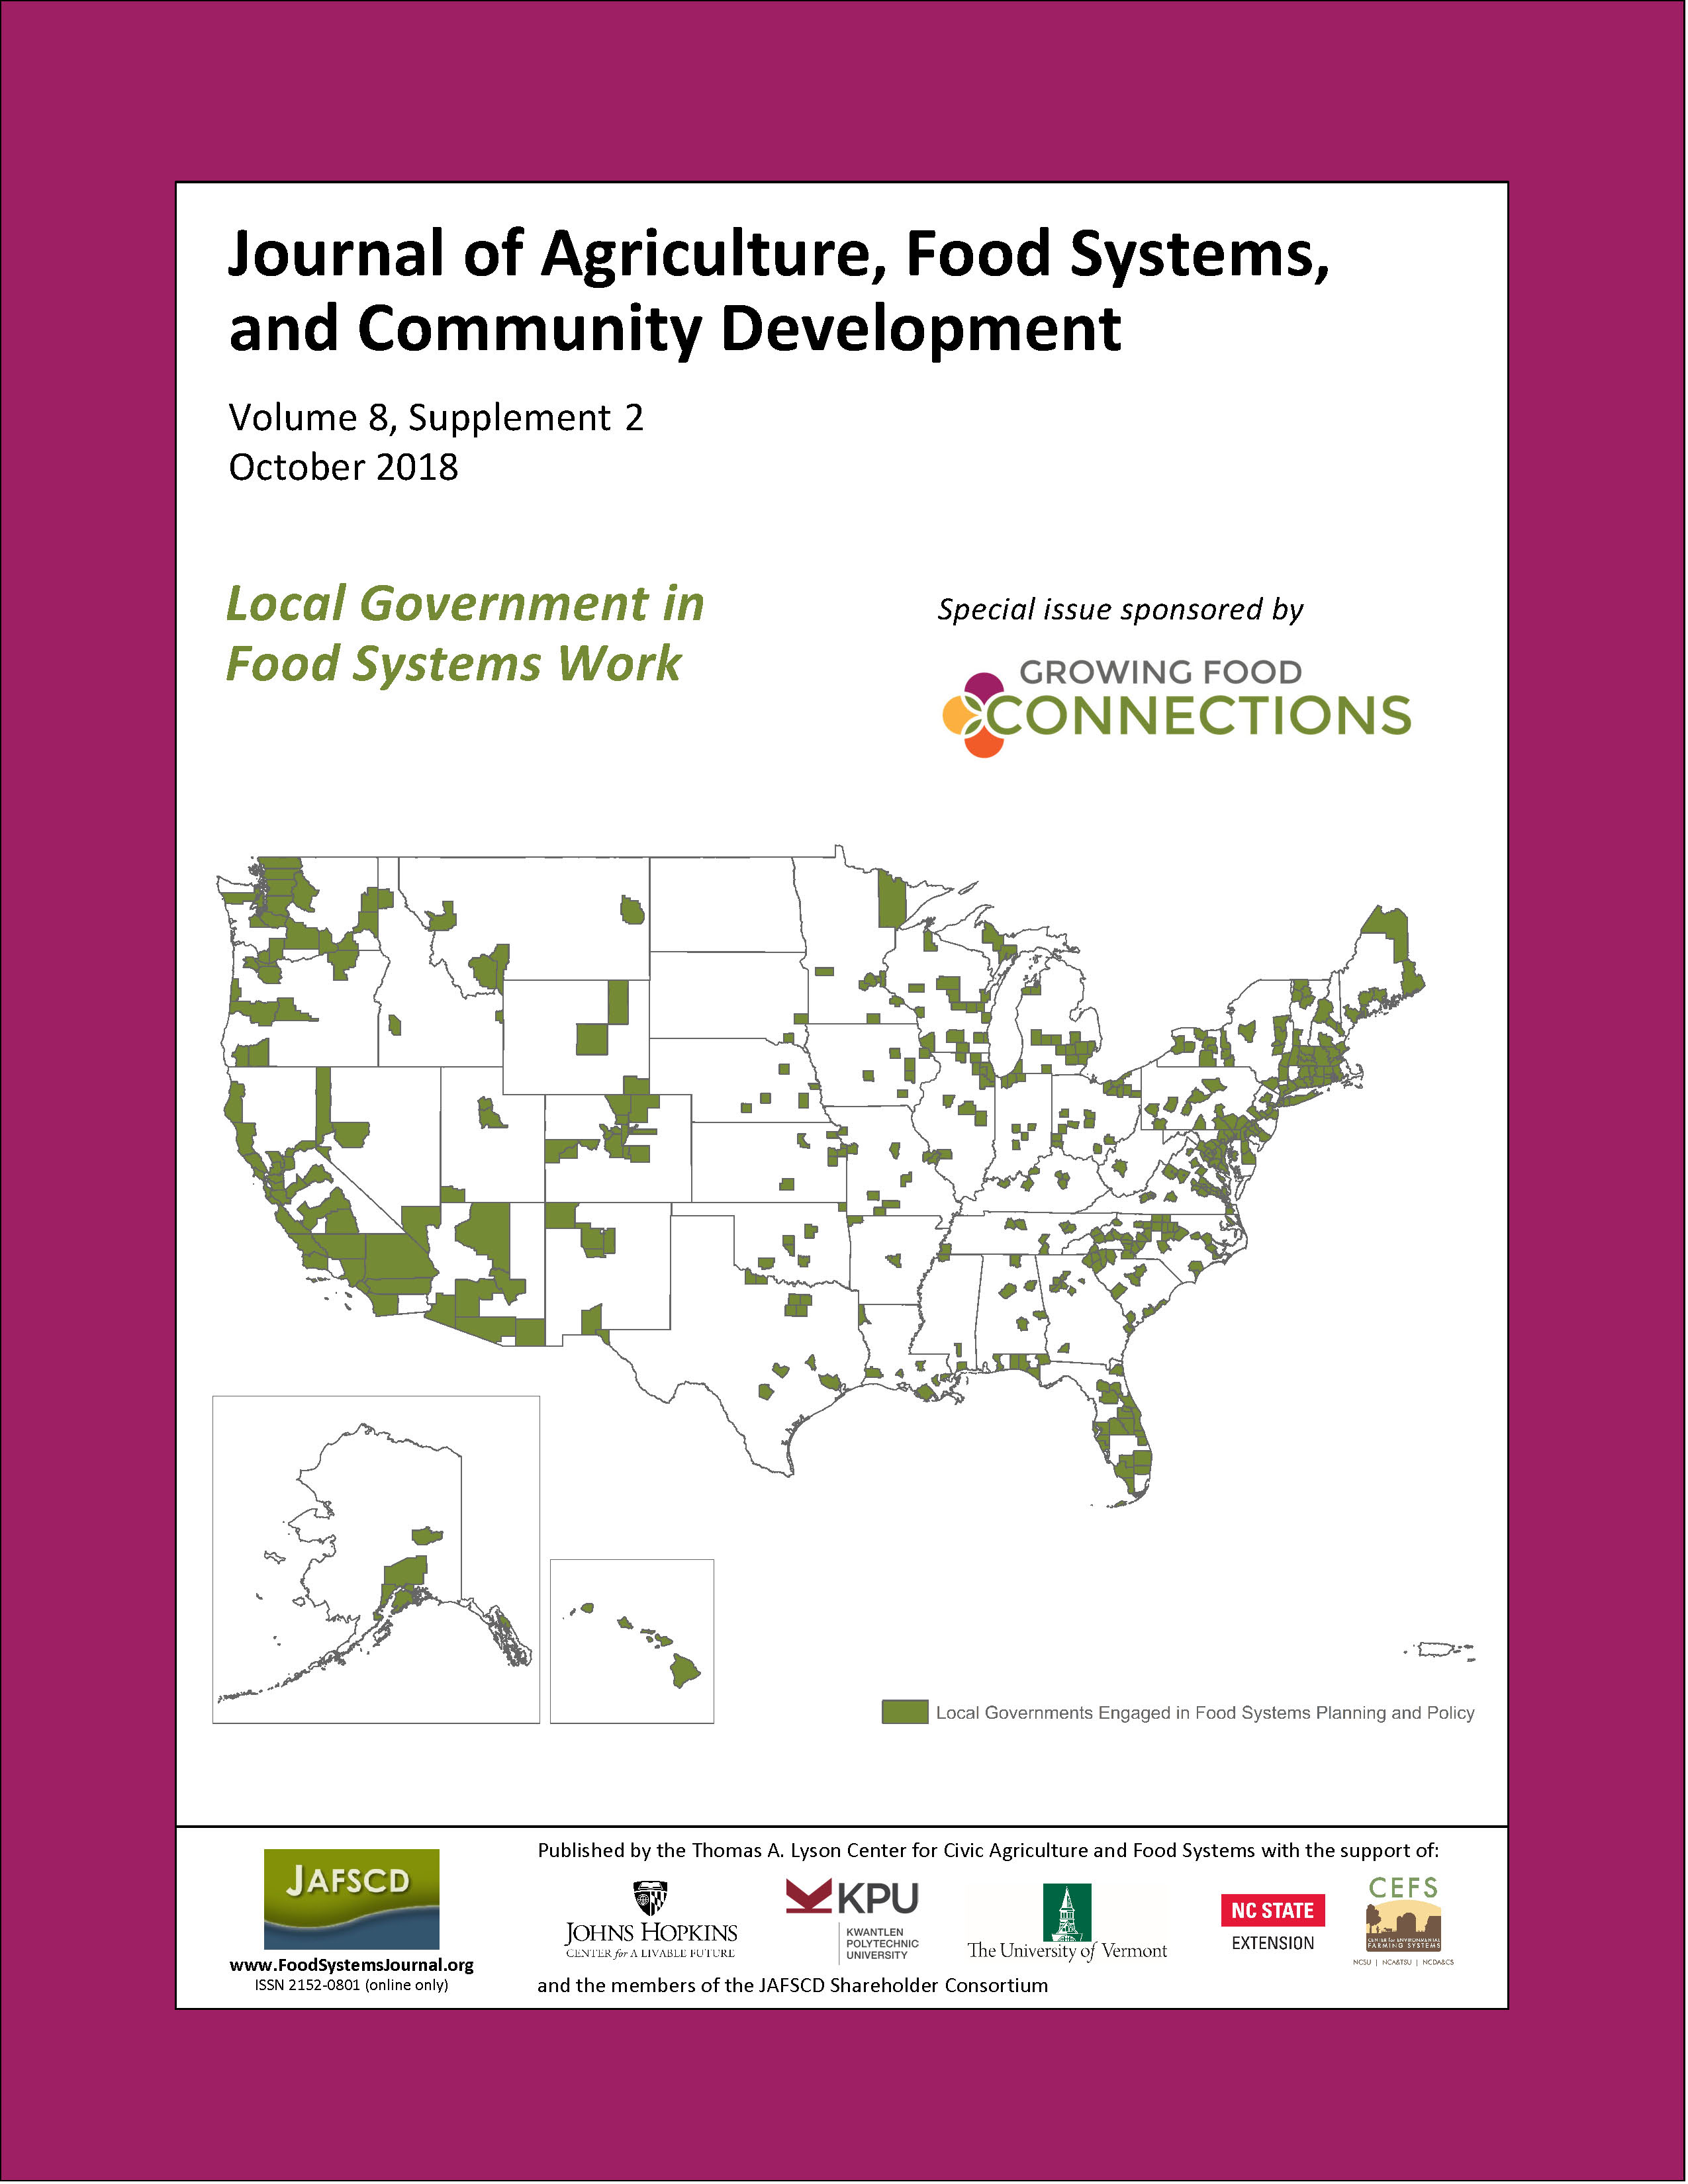 JAFSCD cover displays a U.S. map of local governments engaged in food systems planning and policy